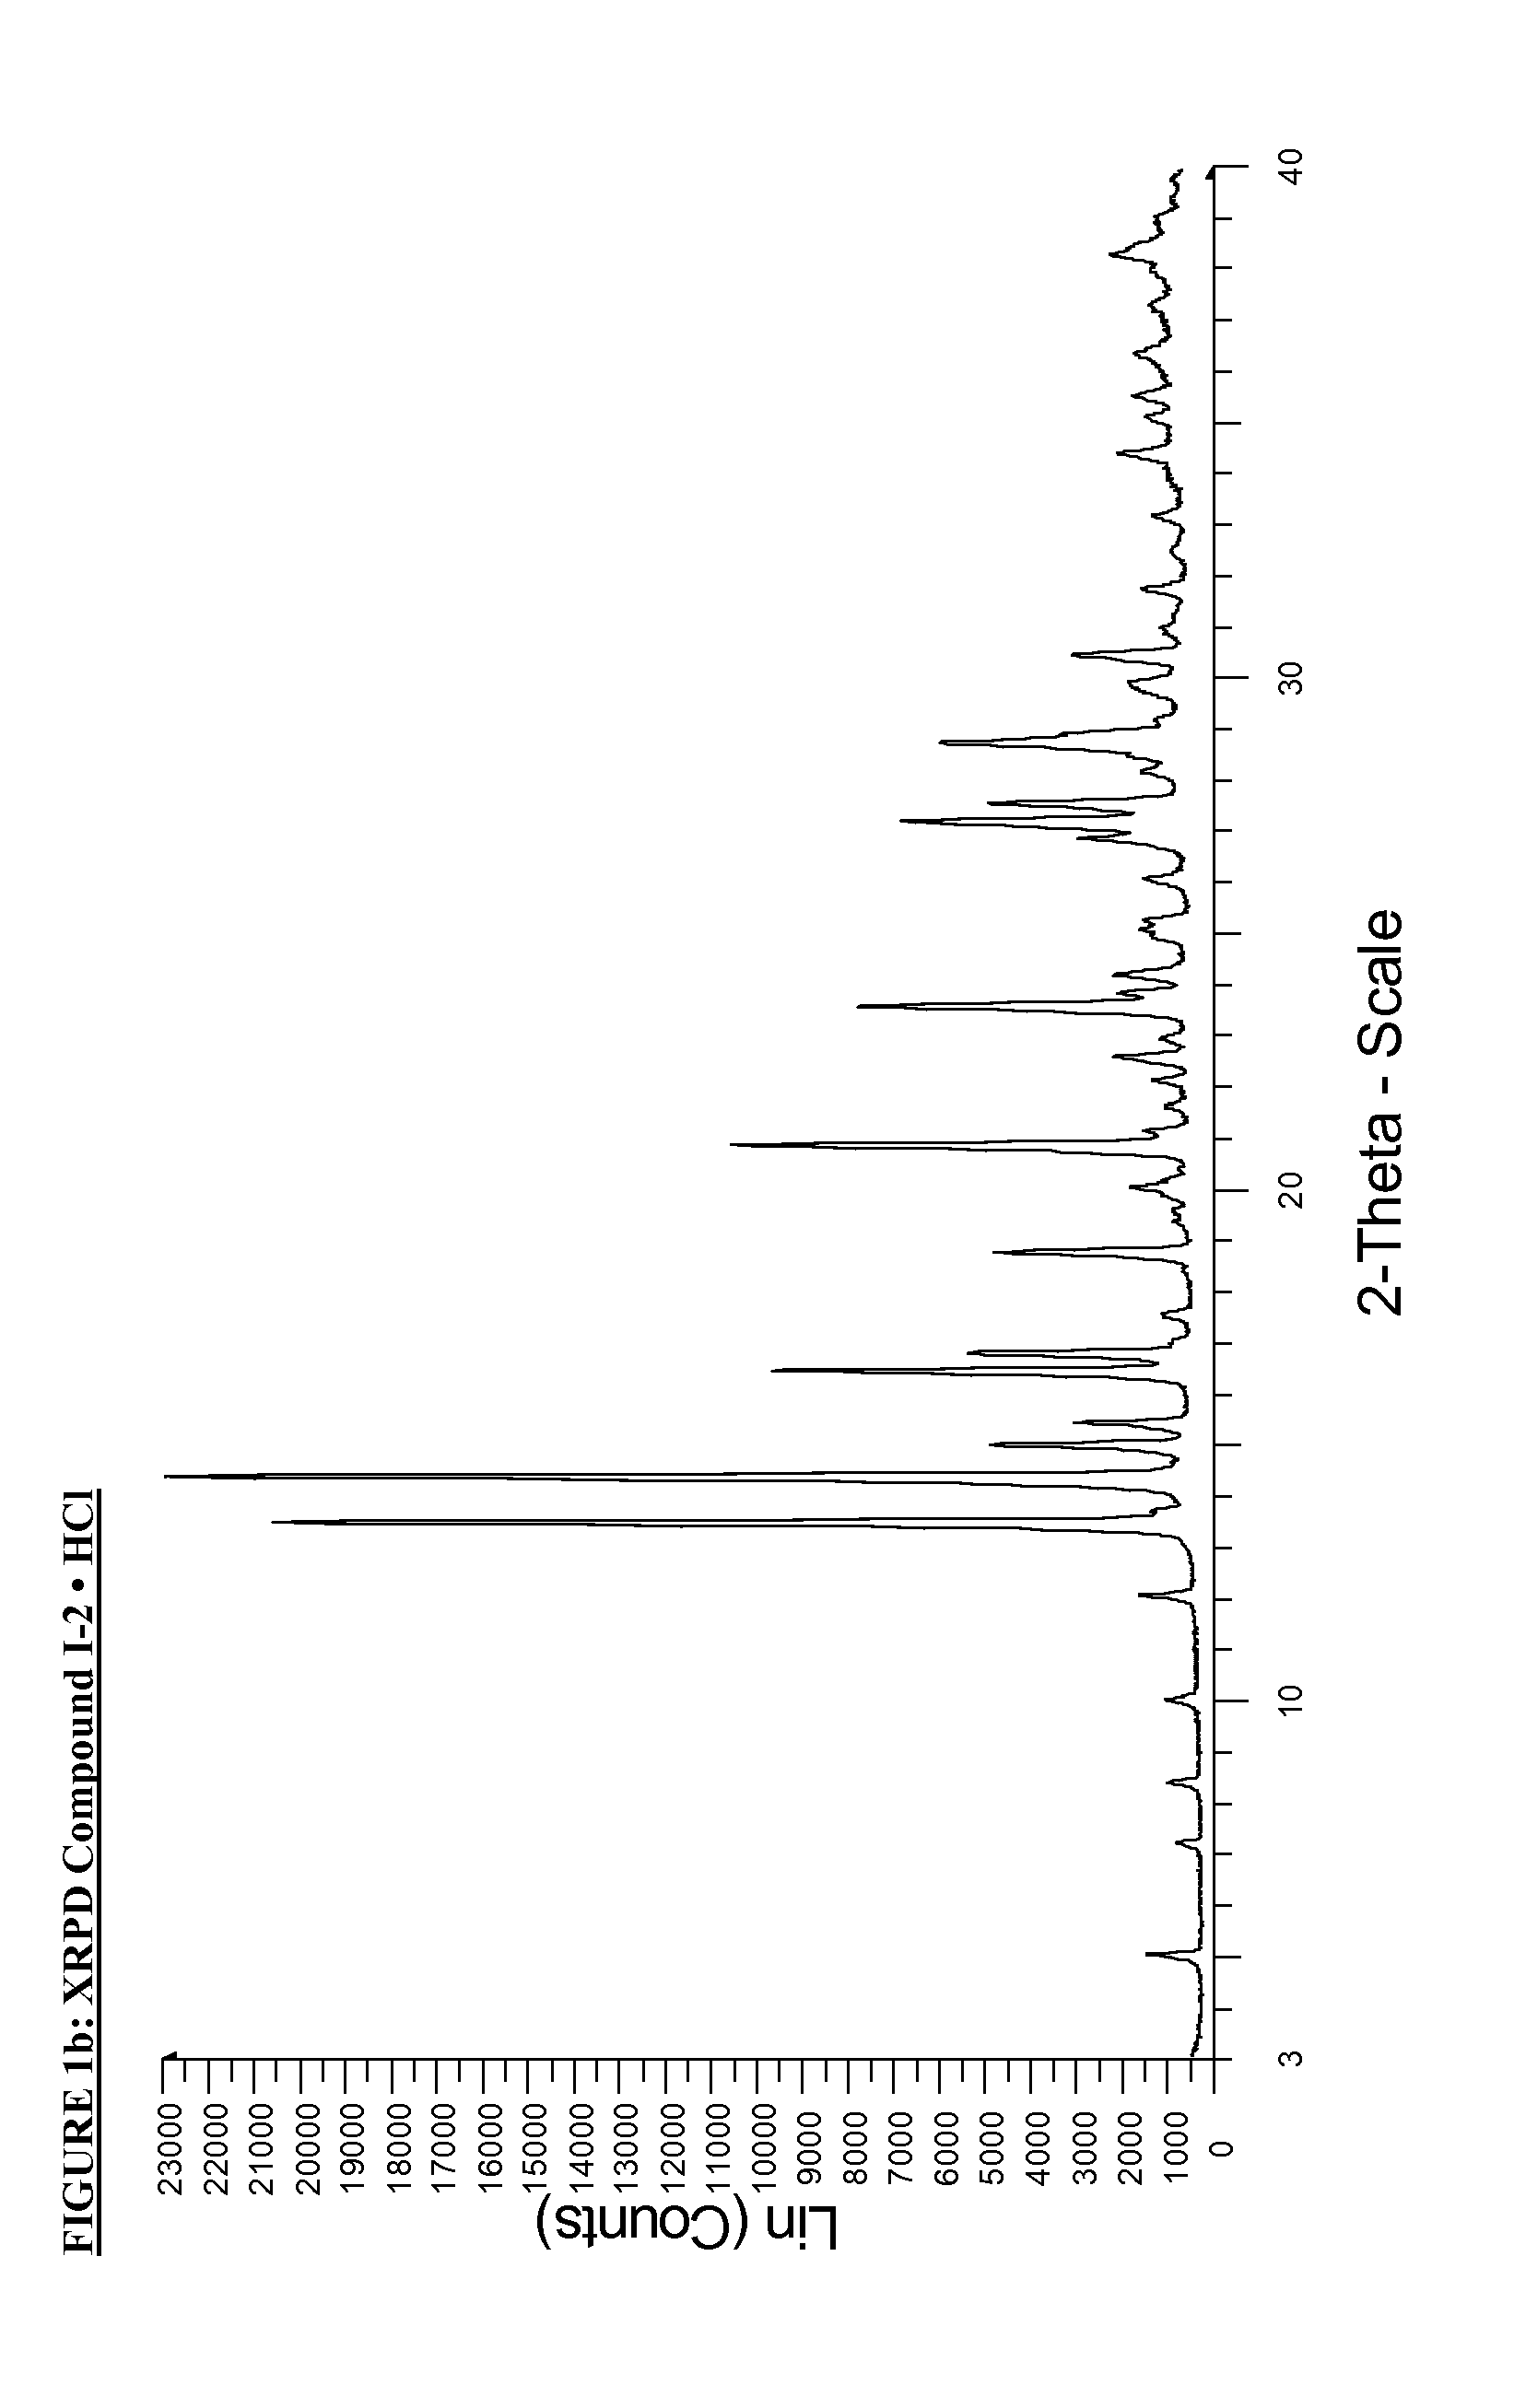 Processes for Making Compounds Useful as Inhibitors of ATR Kinase